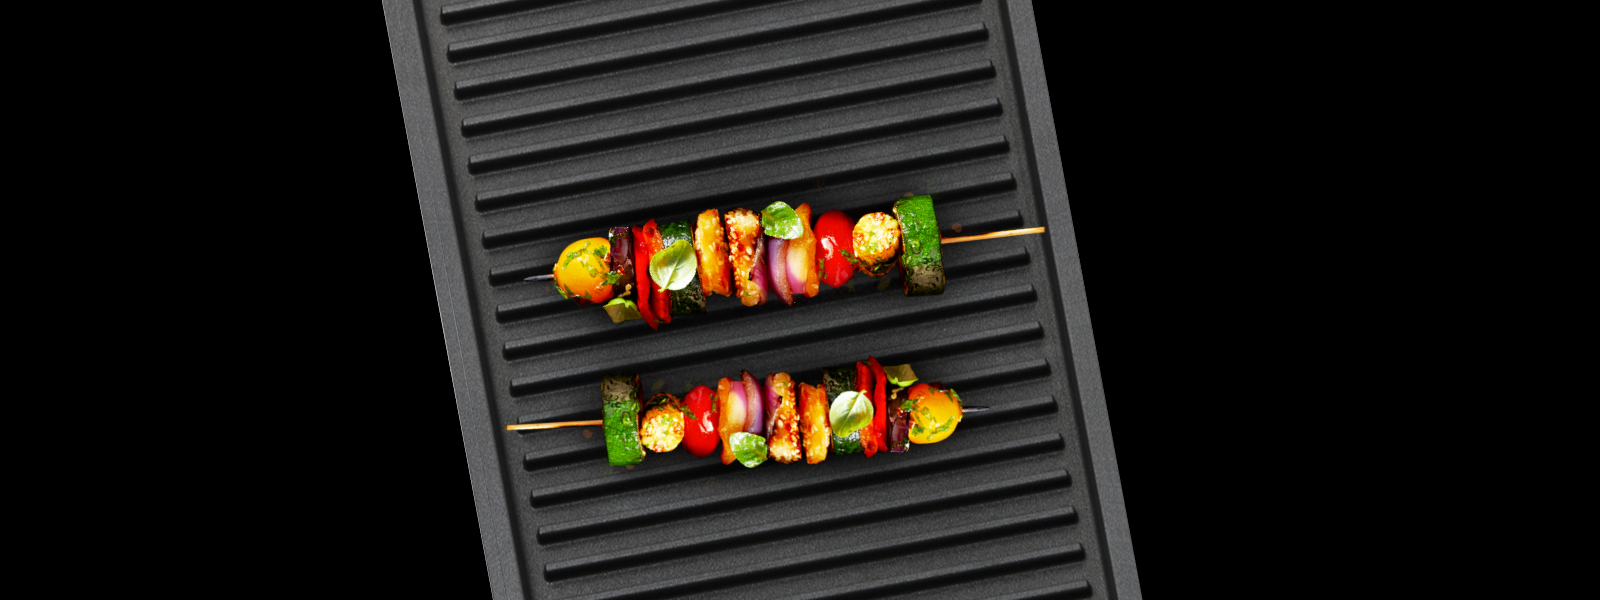 Purchase Select ASKO Induction Cooktop & Receive Bonus Grill Plate OR Teppanyaki Plate Valued at $399* at Hart & Co